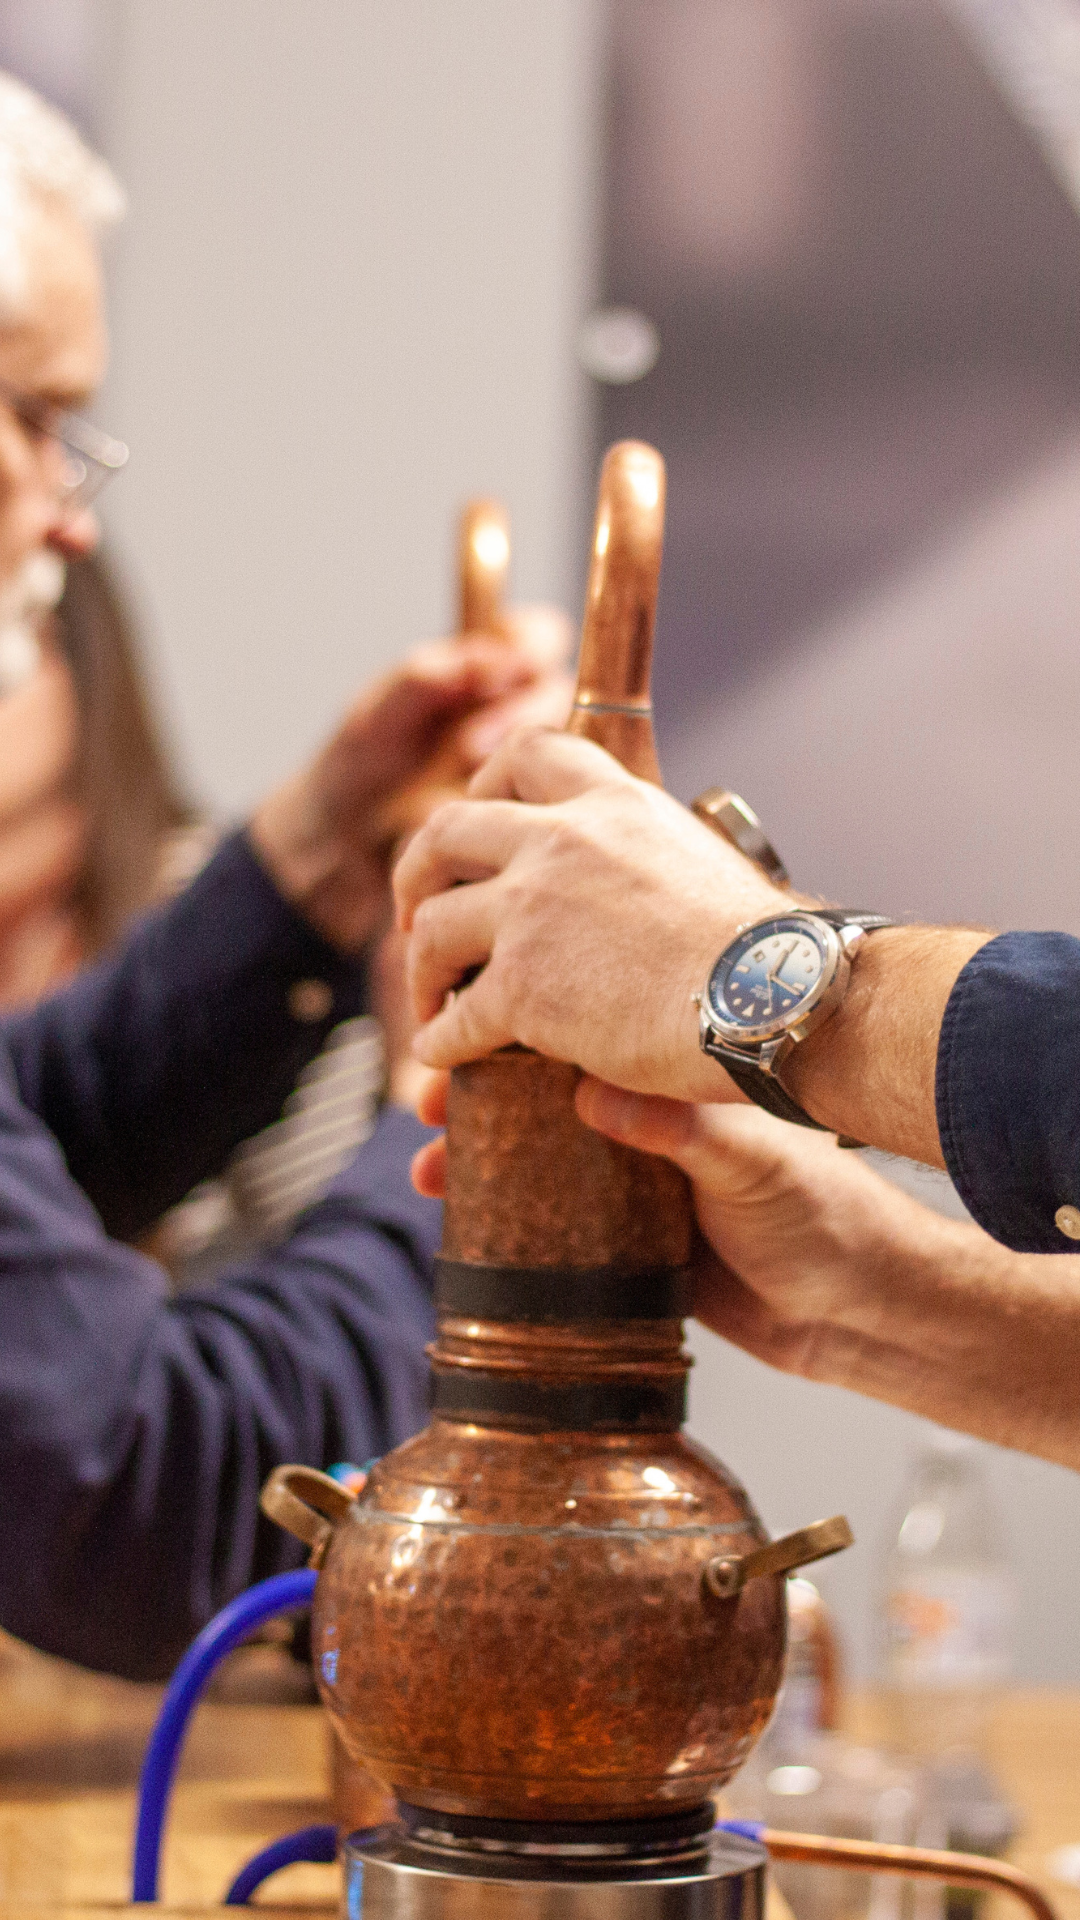 Hands securing copper still at corporate event at Nelson's Gin, Vodka & Rum School portrait.